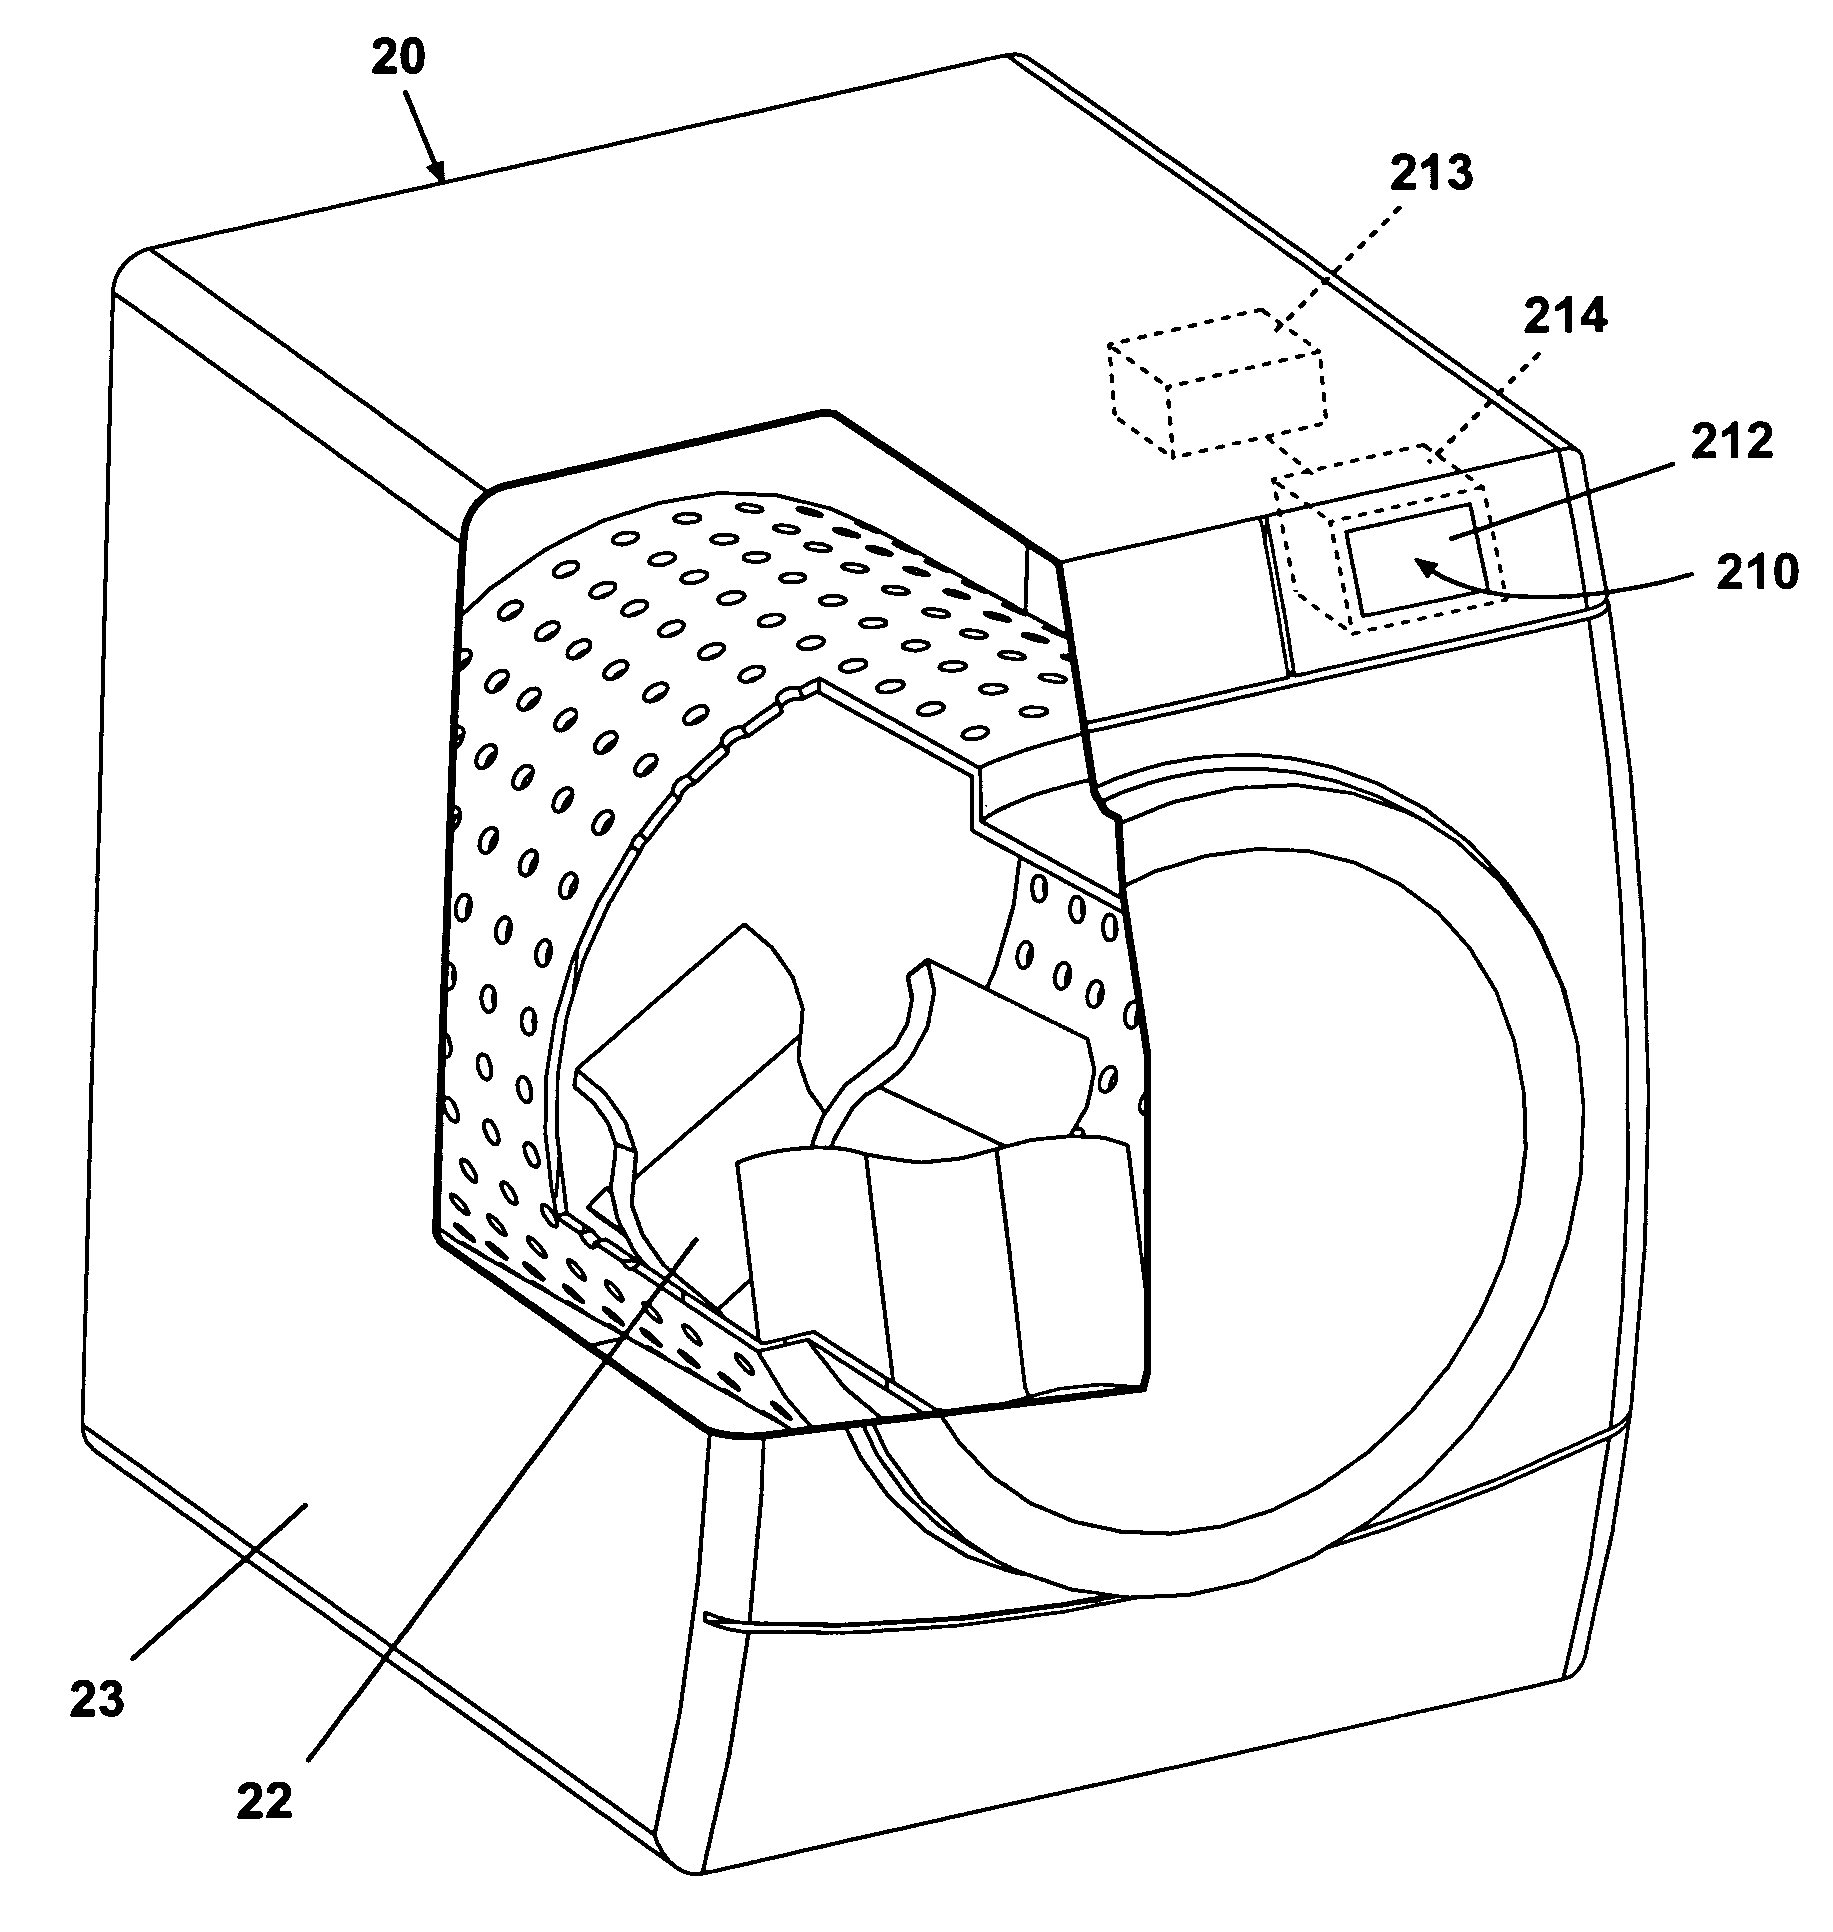 Control process for a revitalizing appliance